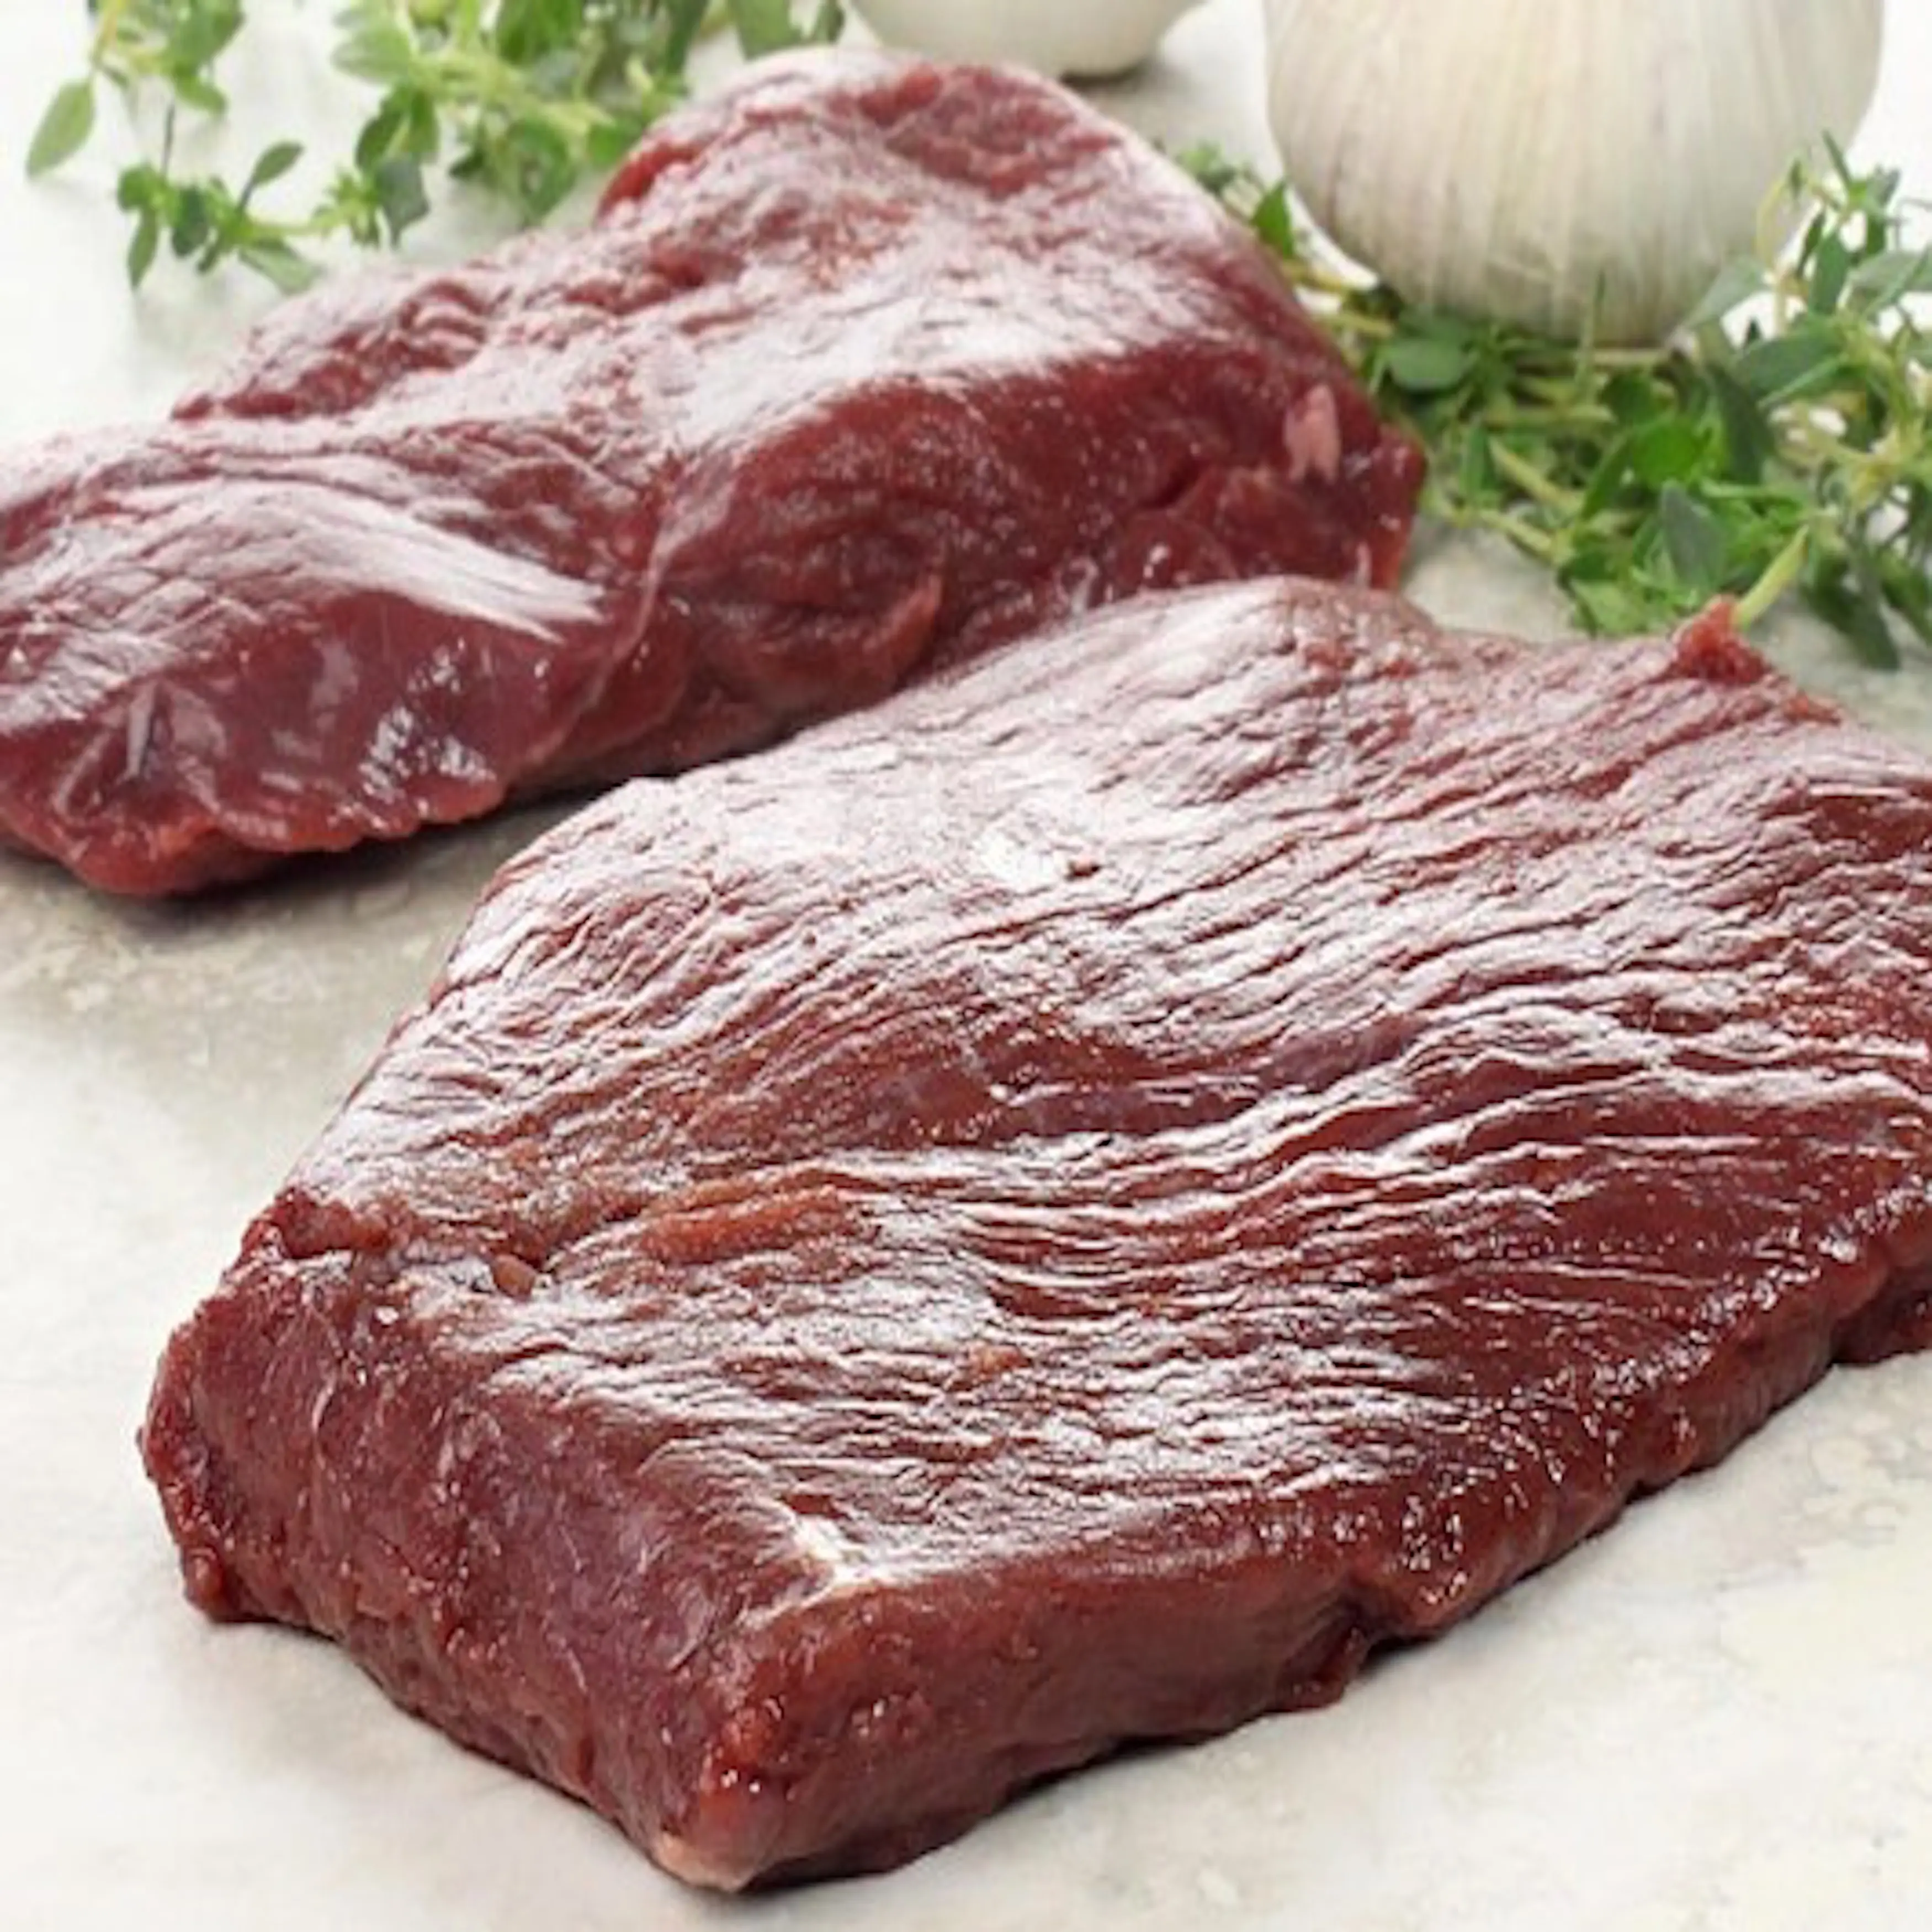 BEST CHEAP KANGAROO MEAT AVAILABLE